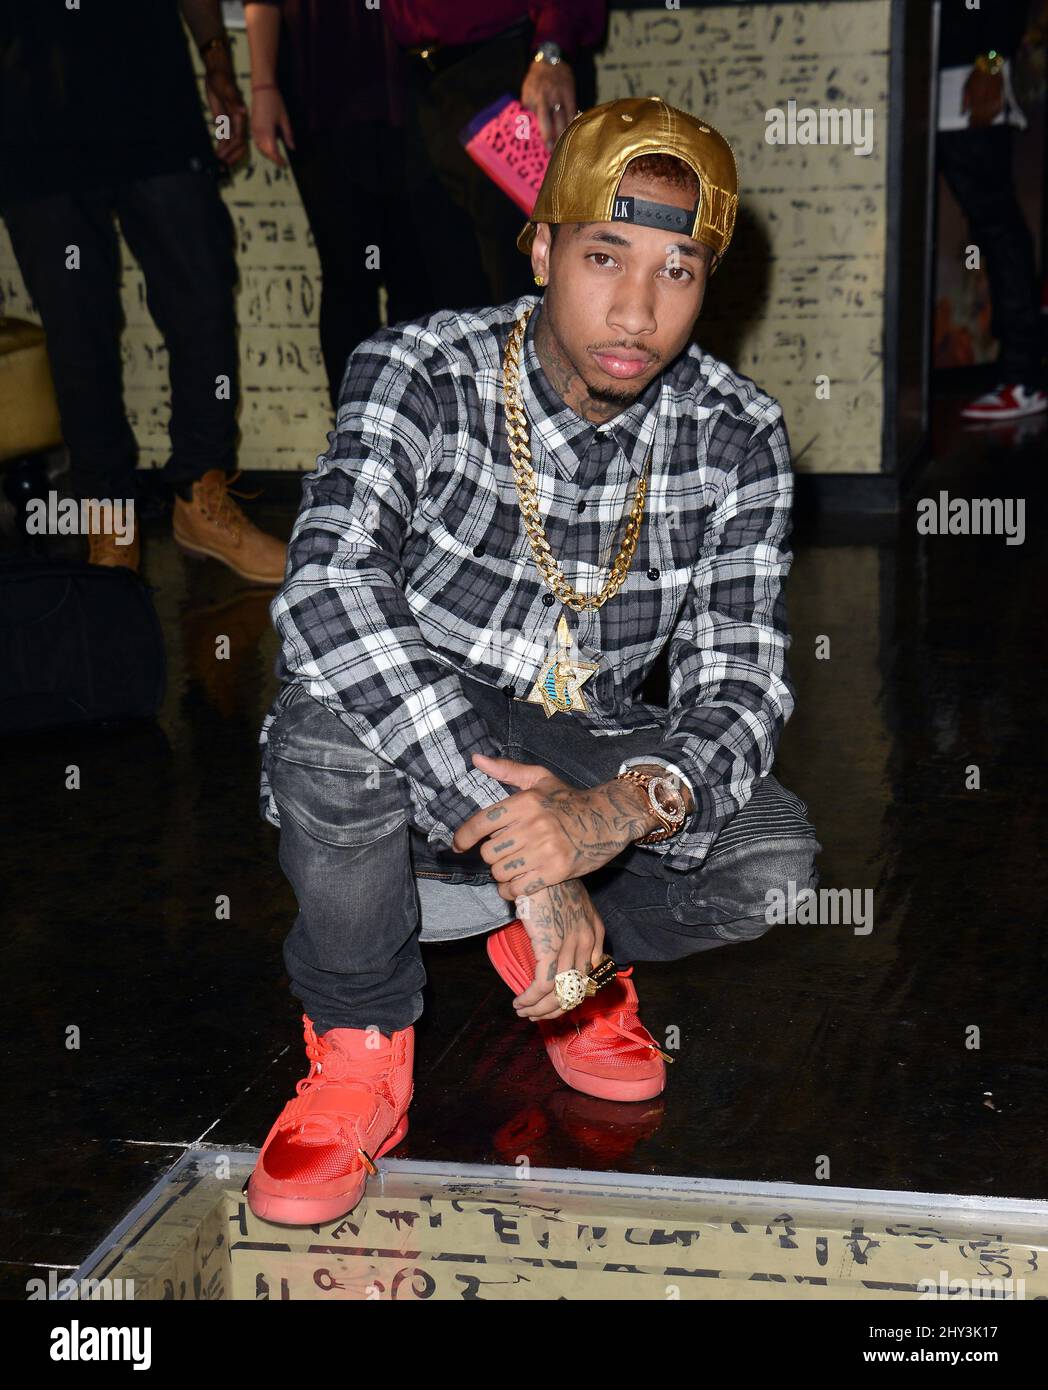 Tyga Spent $120,000 on His Clothing Store Last Kings and, Um, It's